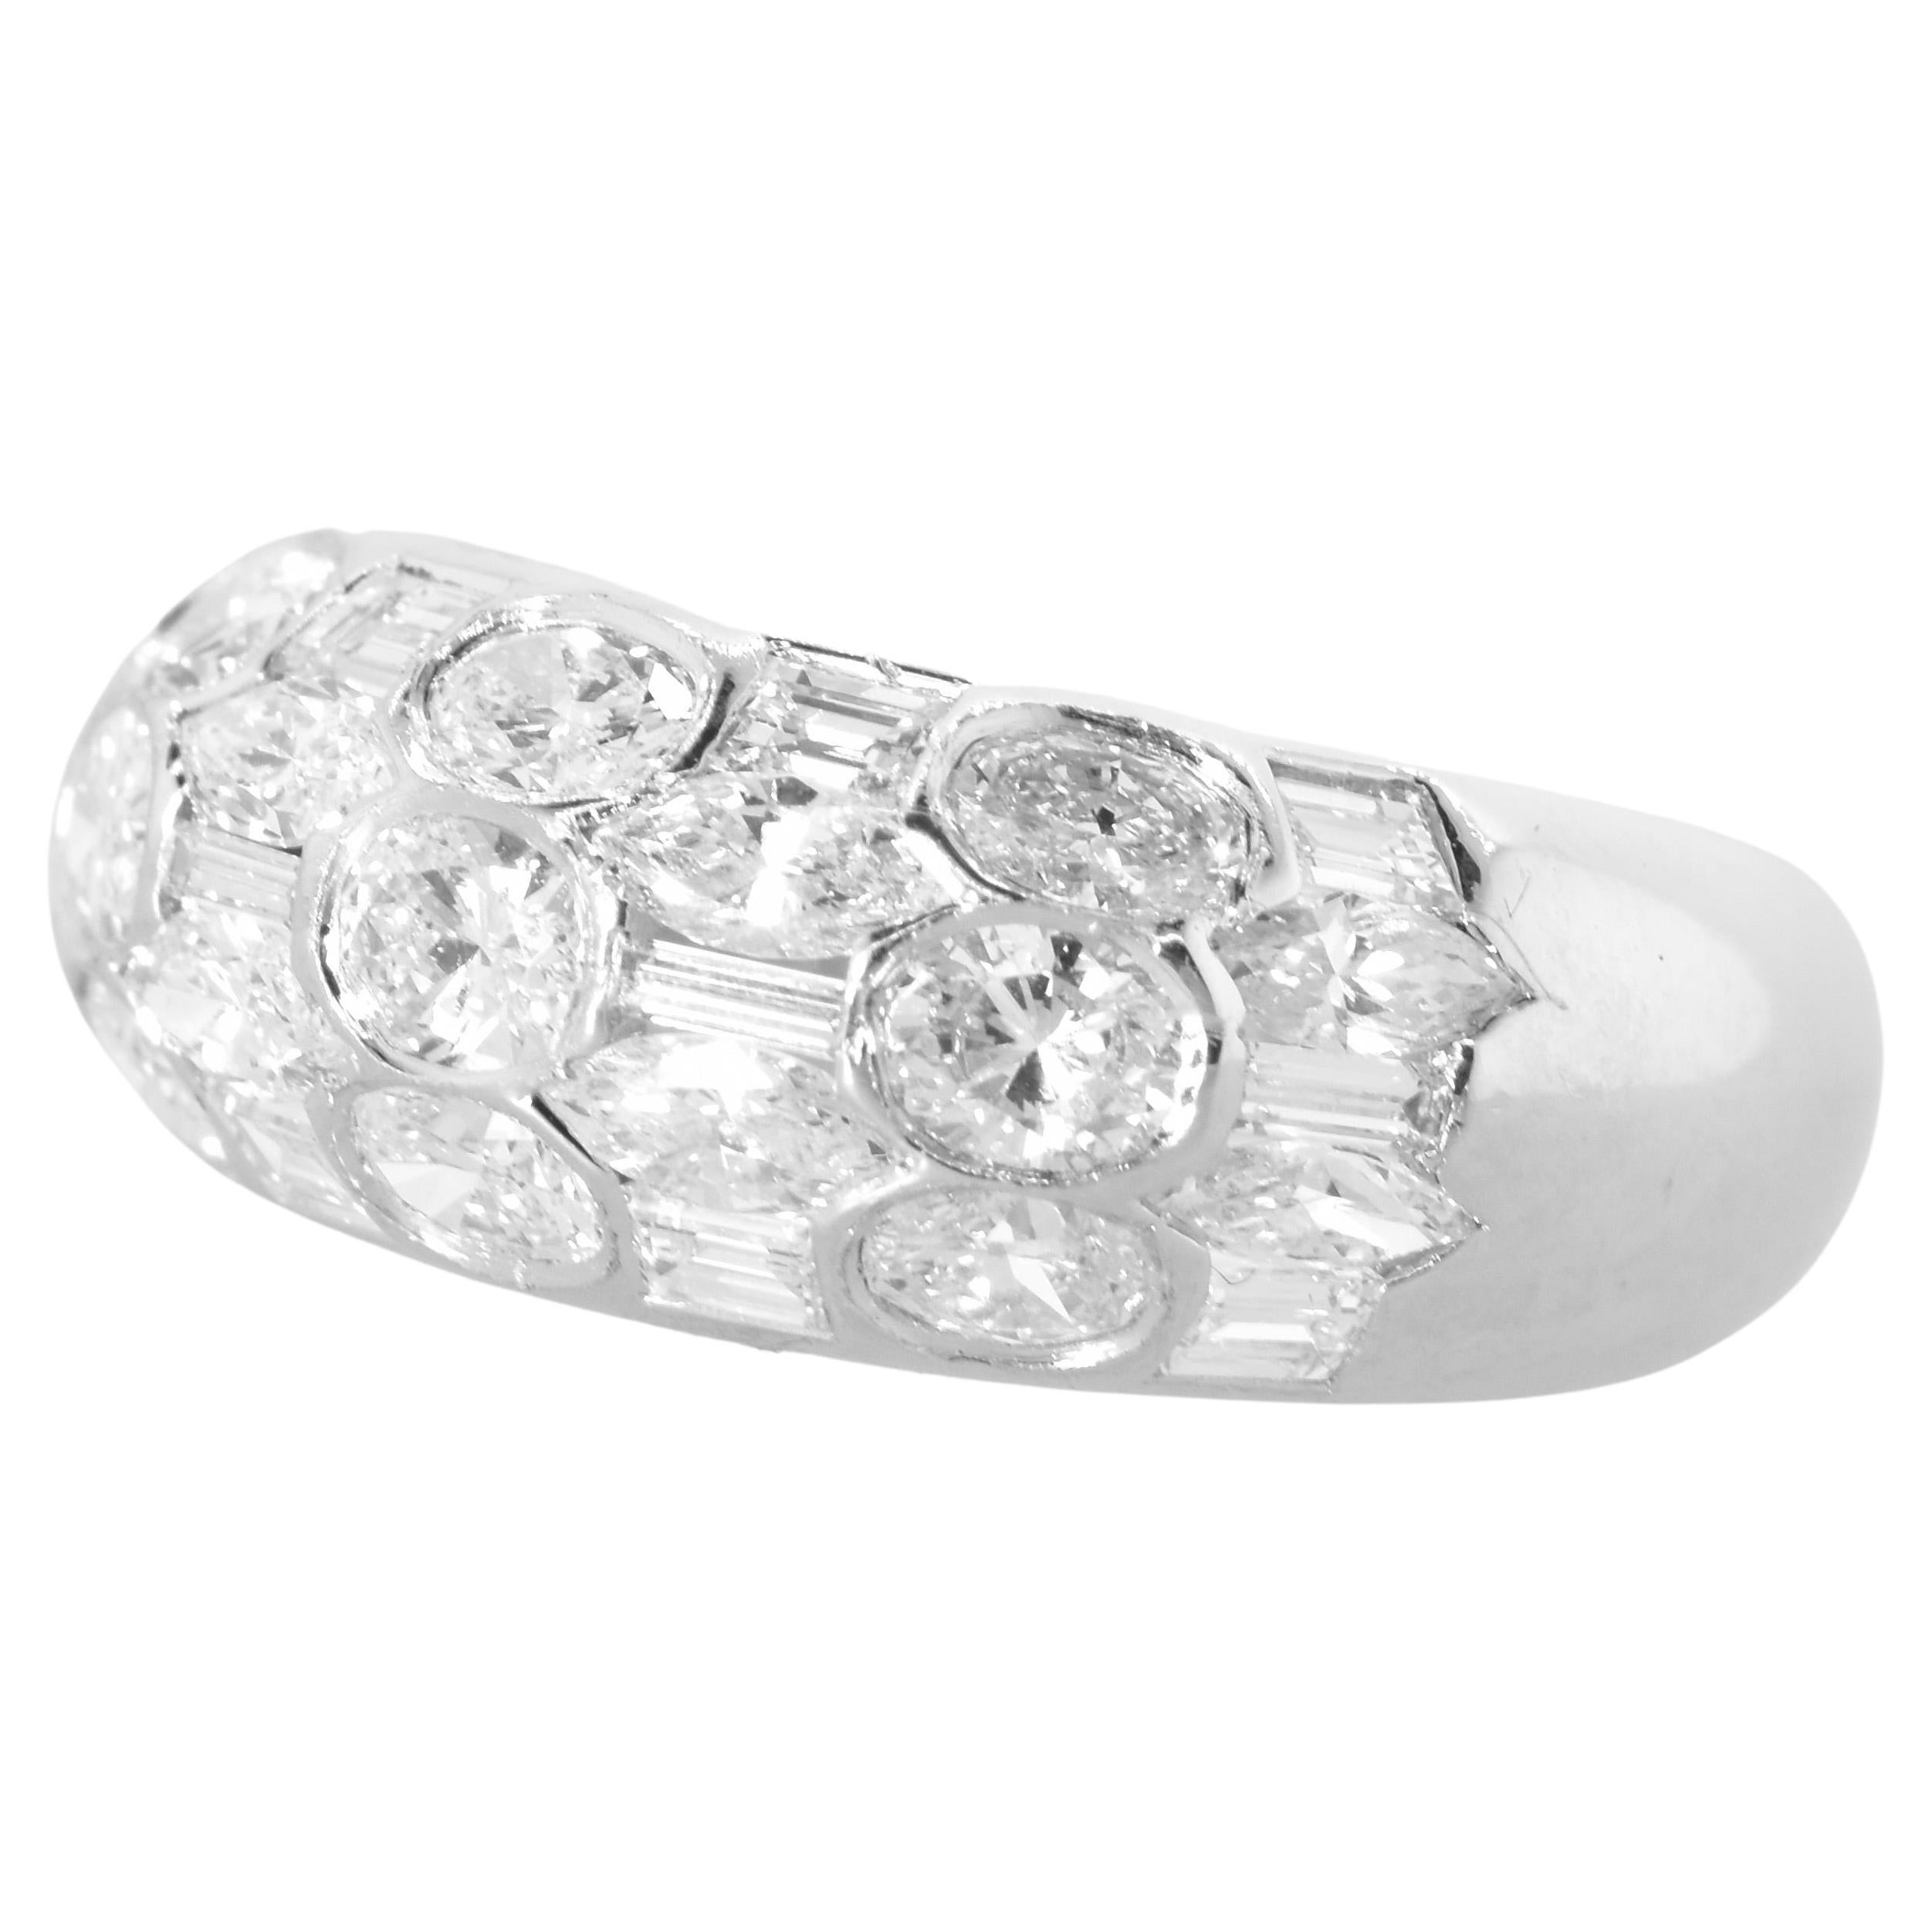 Diamond dome ring with 29 stones amounting to an estimated 2.50 cts of fine white fancy cut diamonds - all near colorless (G/H), and very slightly included (VS1). The diamonds are well matched in quality.  There are 4 different cuts: oval cut,